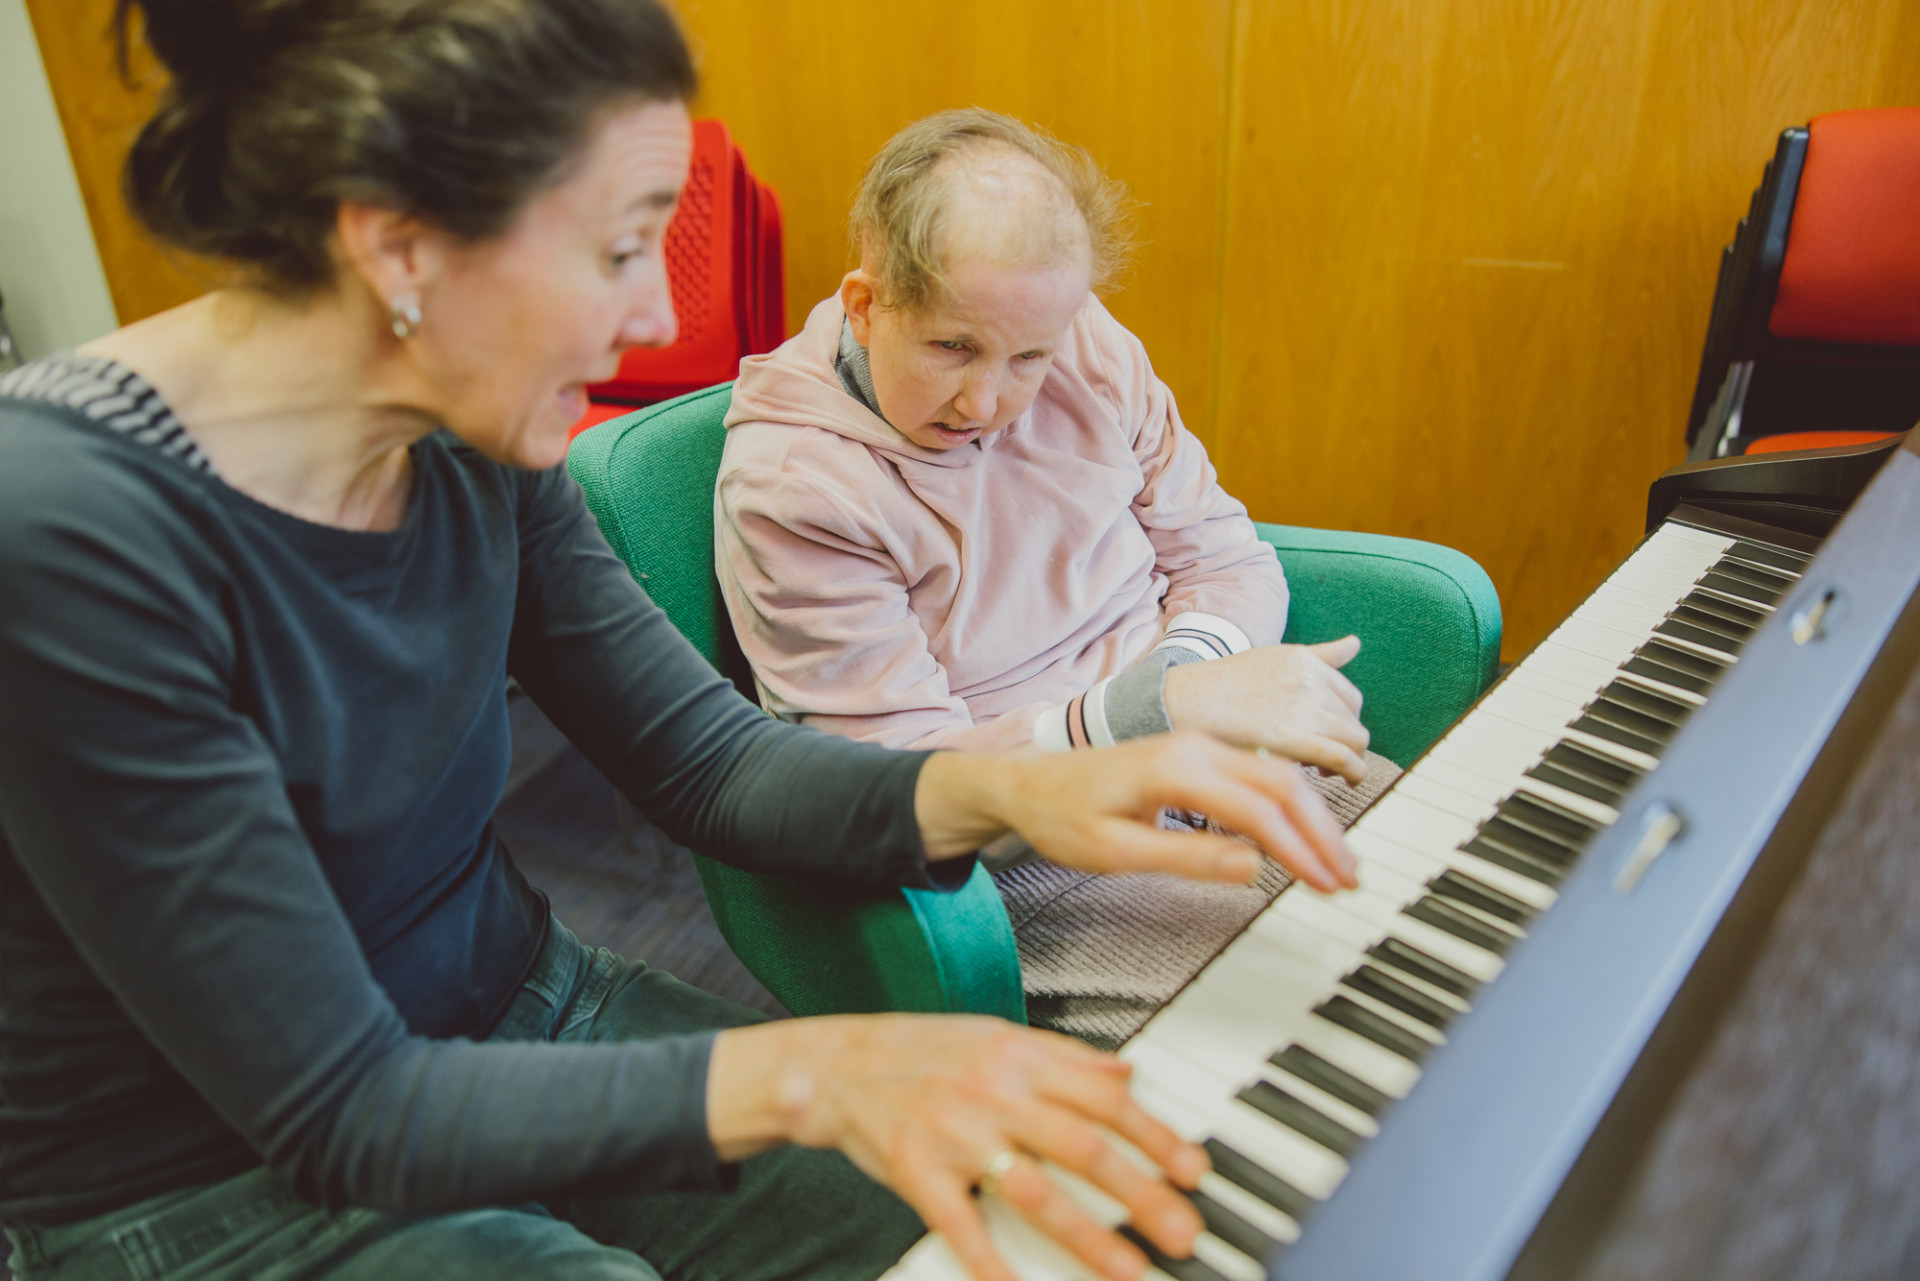 Female music therapist playing upright piano with client